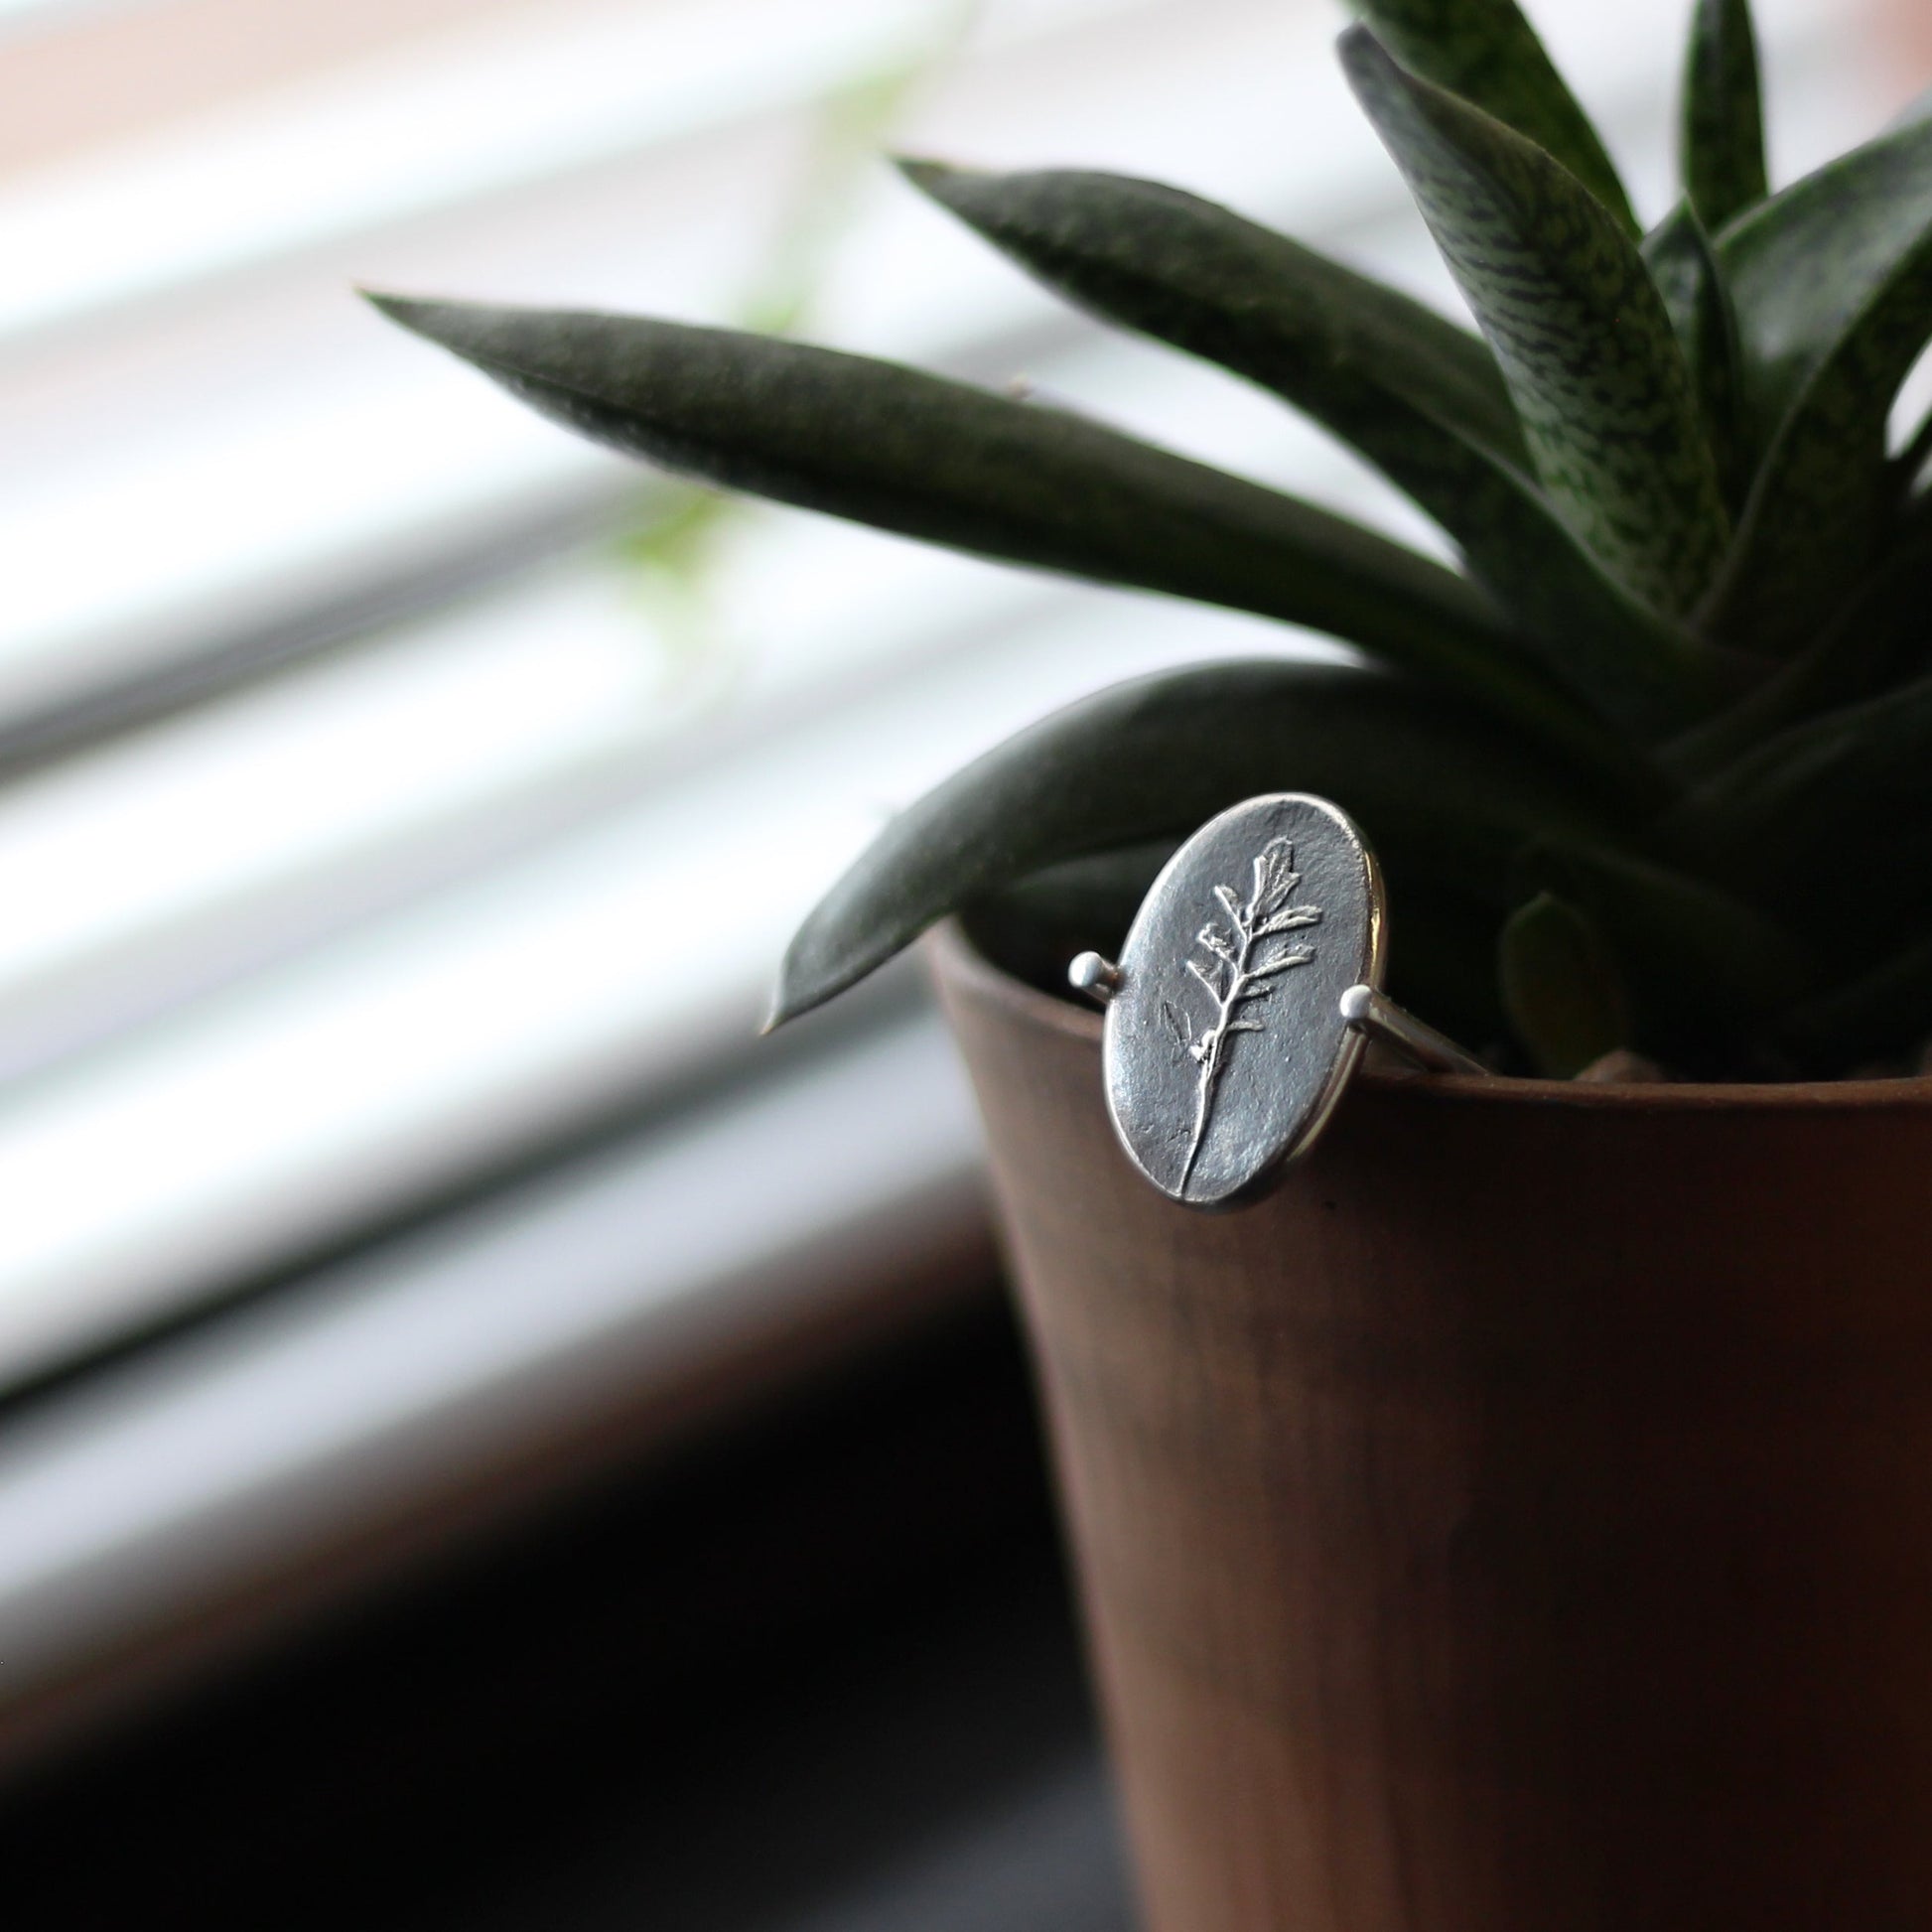 Fossil Leaf Ring next to a pot of aloe vera